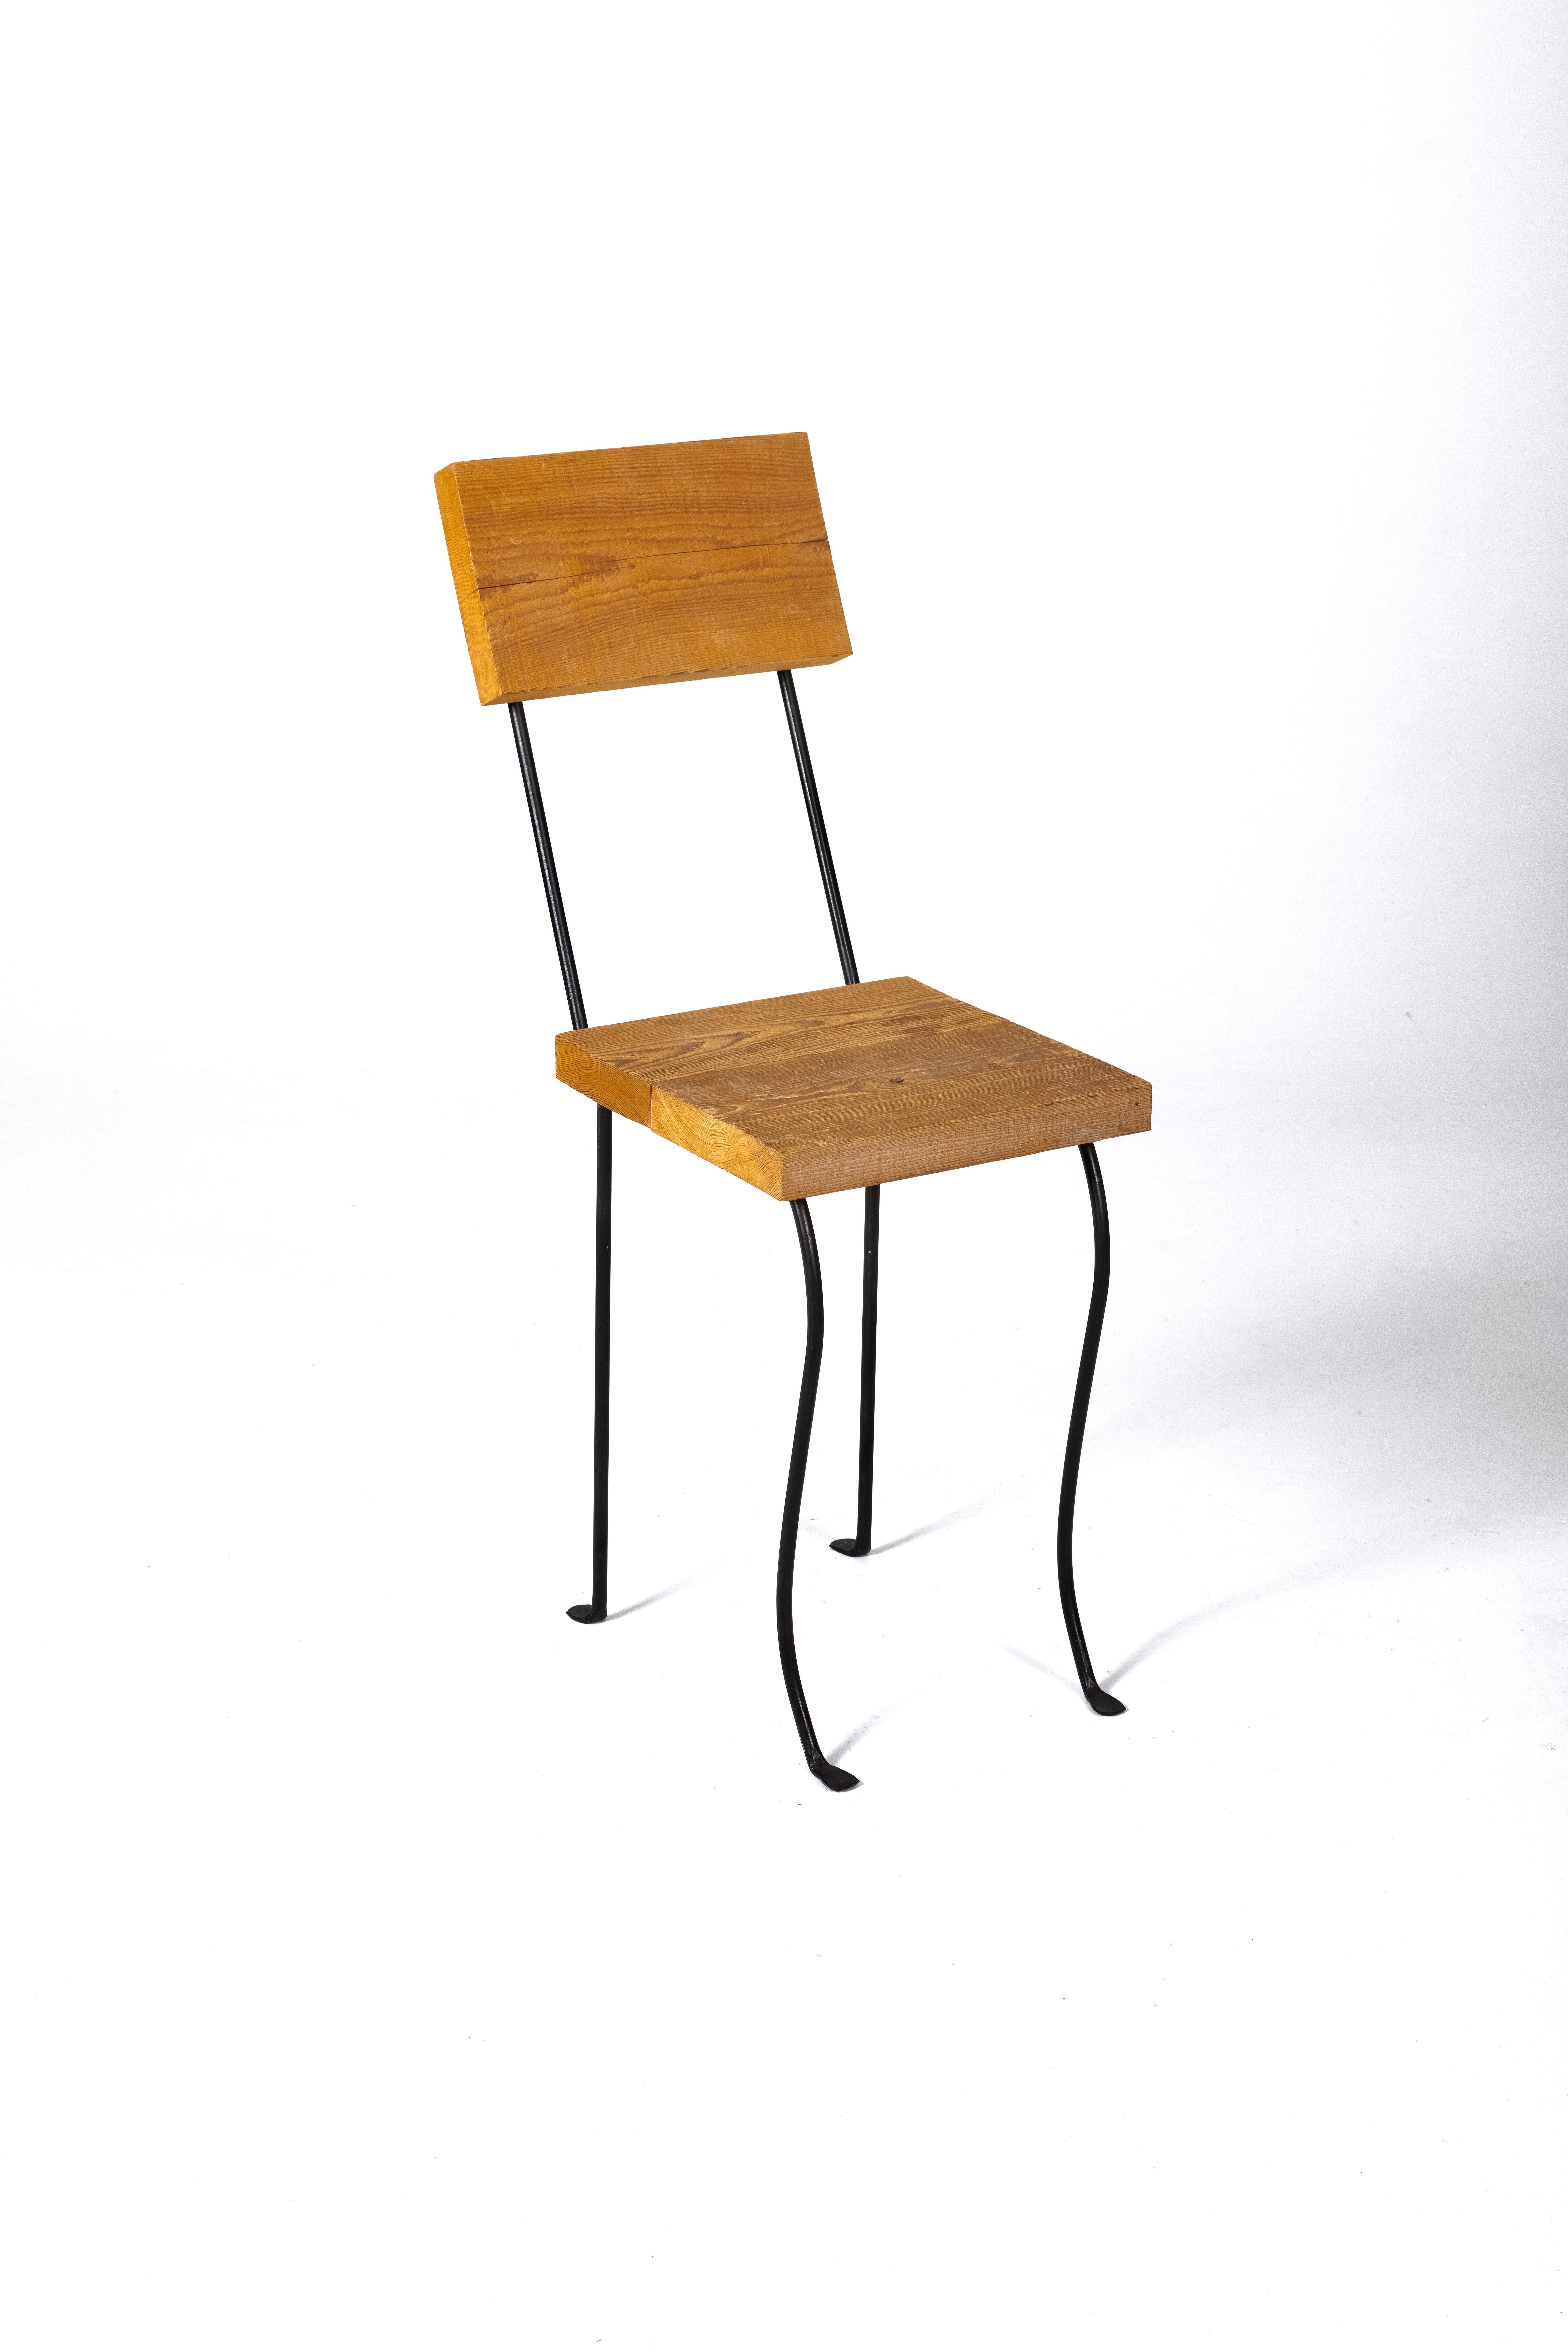 Chair from the 'Ligne Pauvre' (Poor Line) by designer Patrice Gruffaz for the publishing house Lieux in the 90s. This chair features a seat and backrest in raw fir and a black lacquered metal base. Provenance: Etat de Siège Gallery.
LP1513-1514